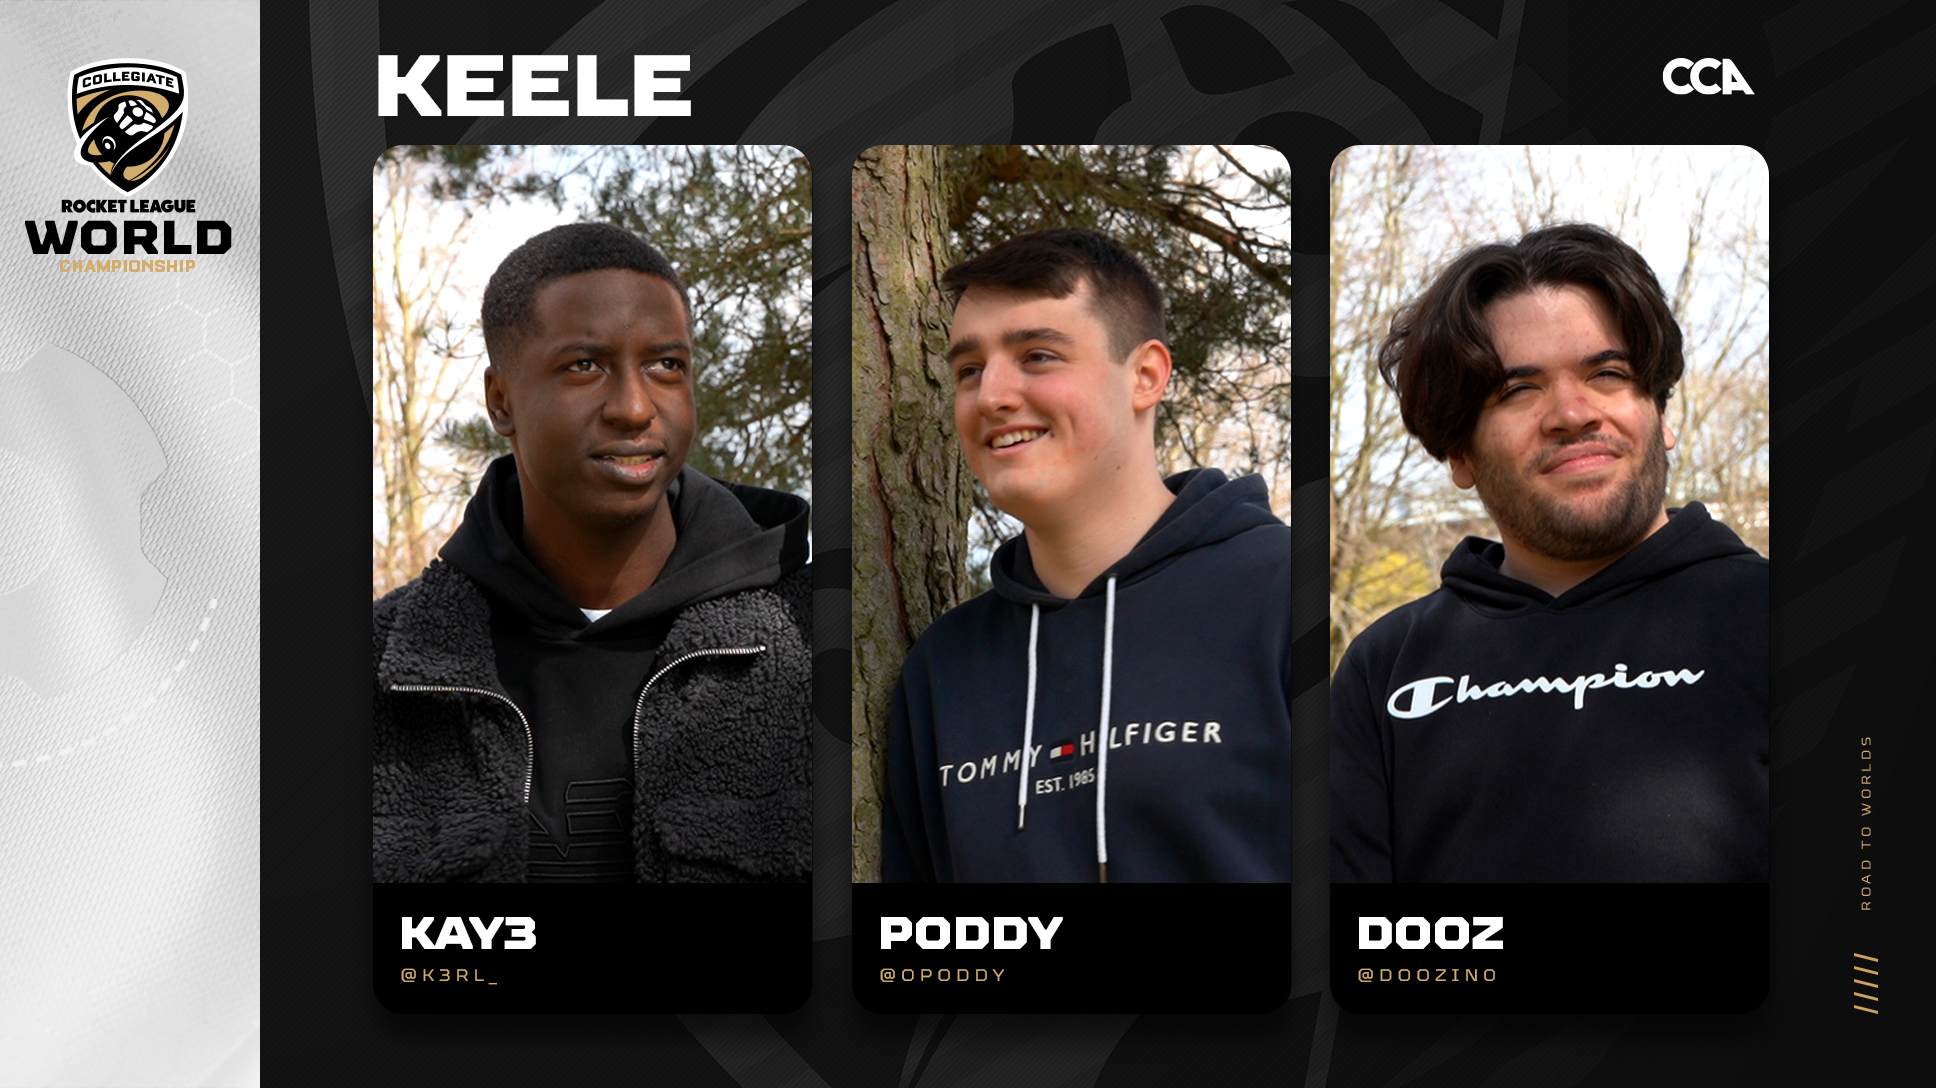 Keele University Road to Worlds header with images of Kay3, Poddy, and Dooz